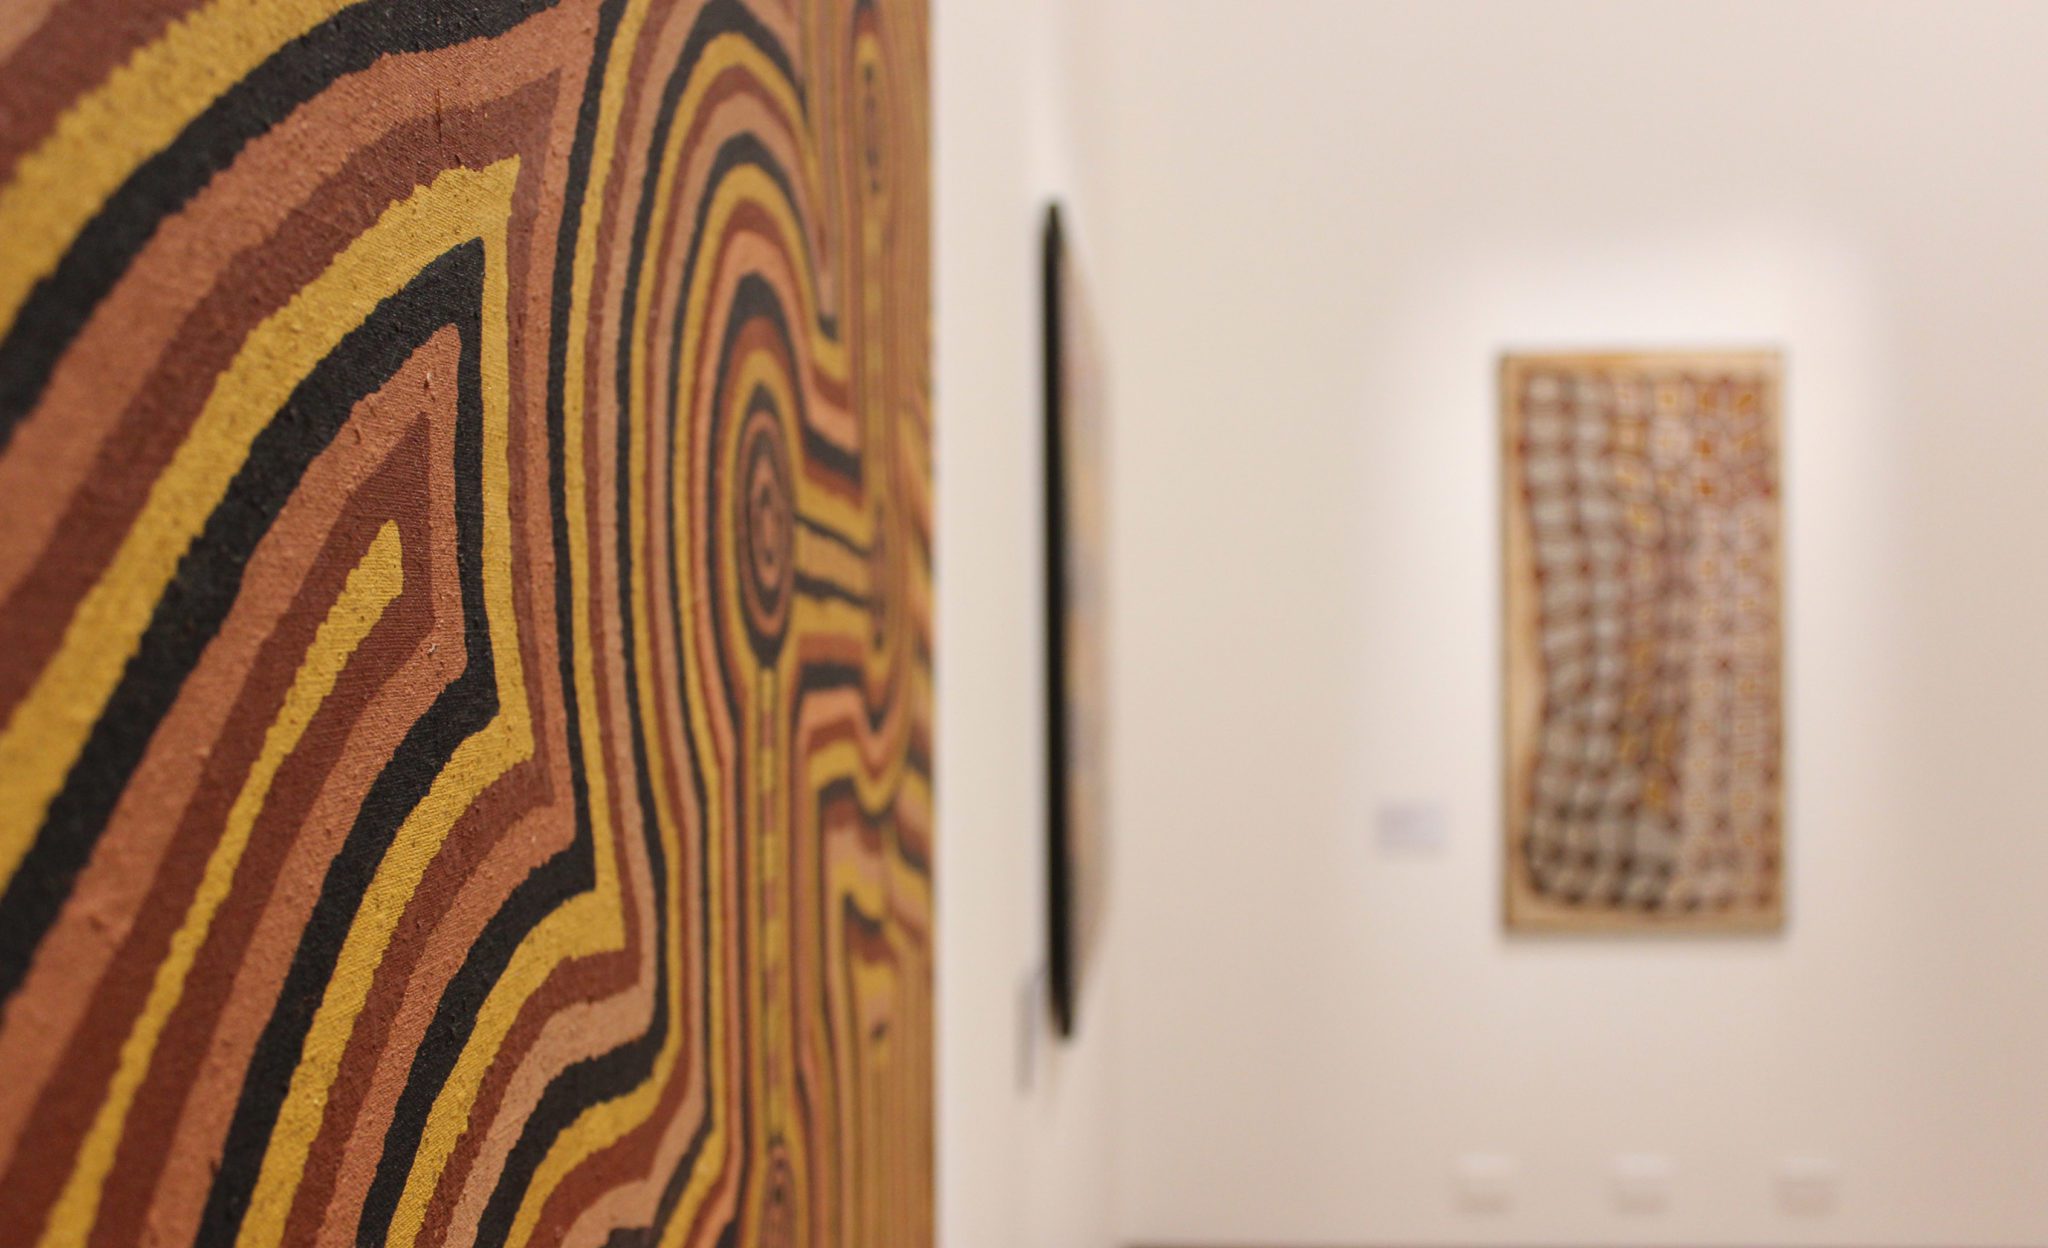 Exhibition documentation of Friendly Country, Friendly People: Art from Papunya Tula, works from the CBUS Collection of Australian Art. Shown in Gallery 1 & 2, Latrobe Regional Gallery, 2020.